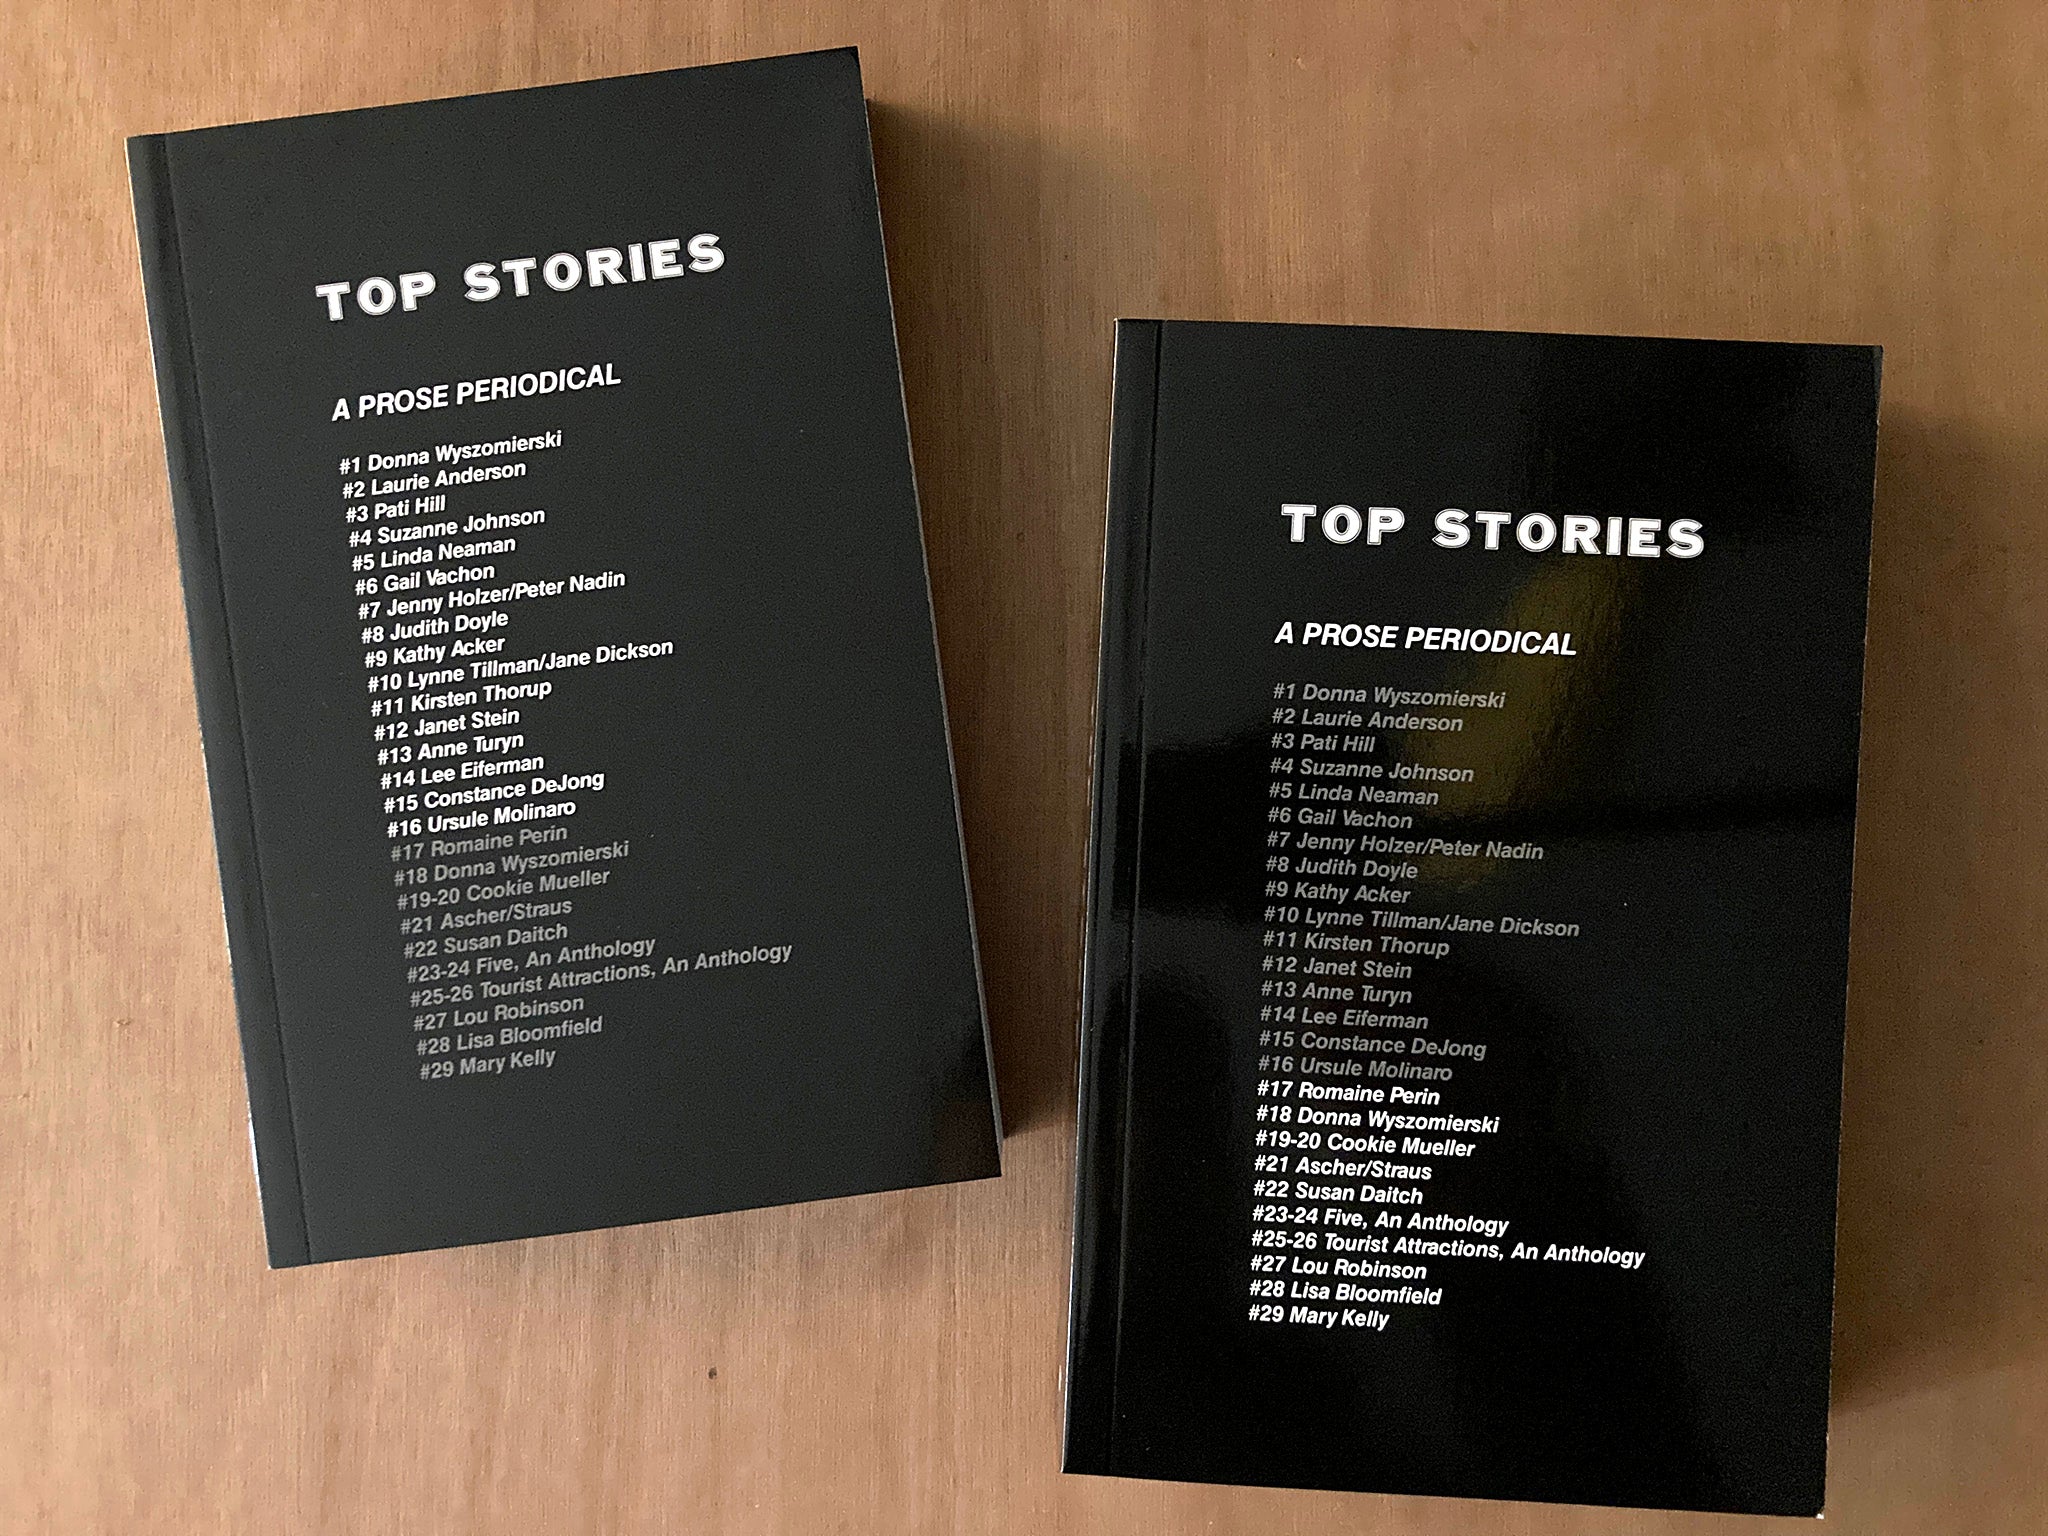 TOP STORIES by Various Artists, edited by Anne Turyn